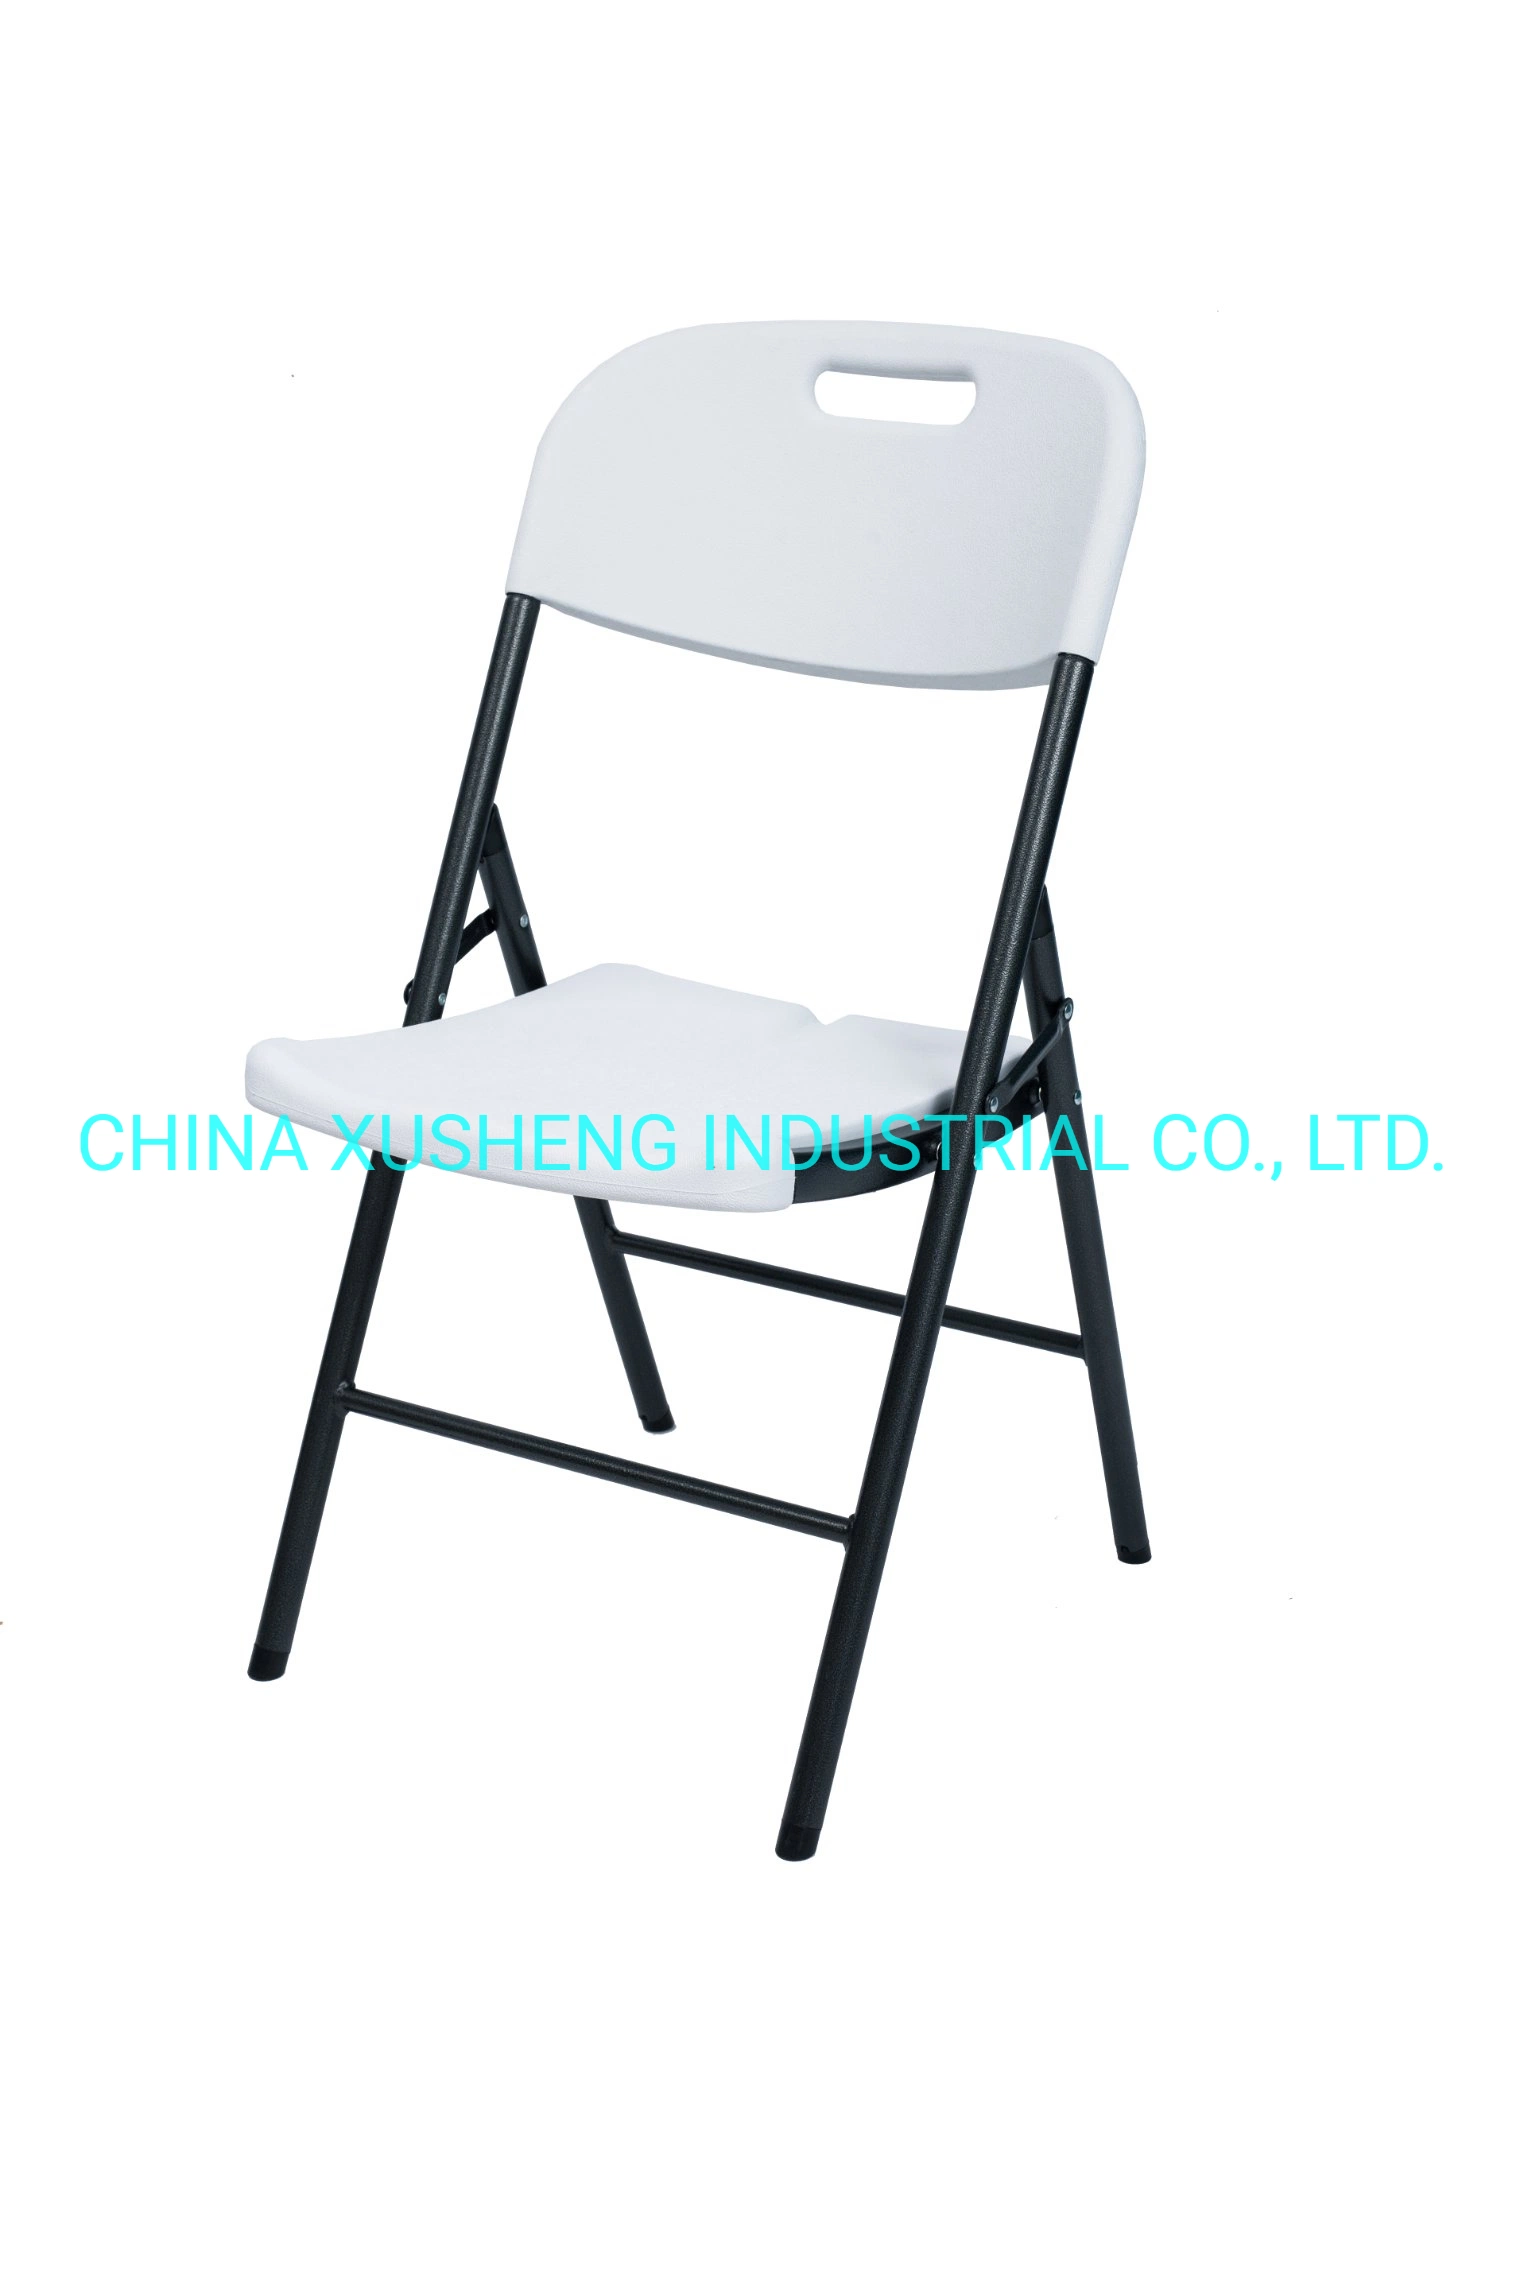 Outdoor Chair Blowing Mold Steel-HDPE Foldable Chair